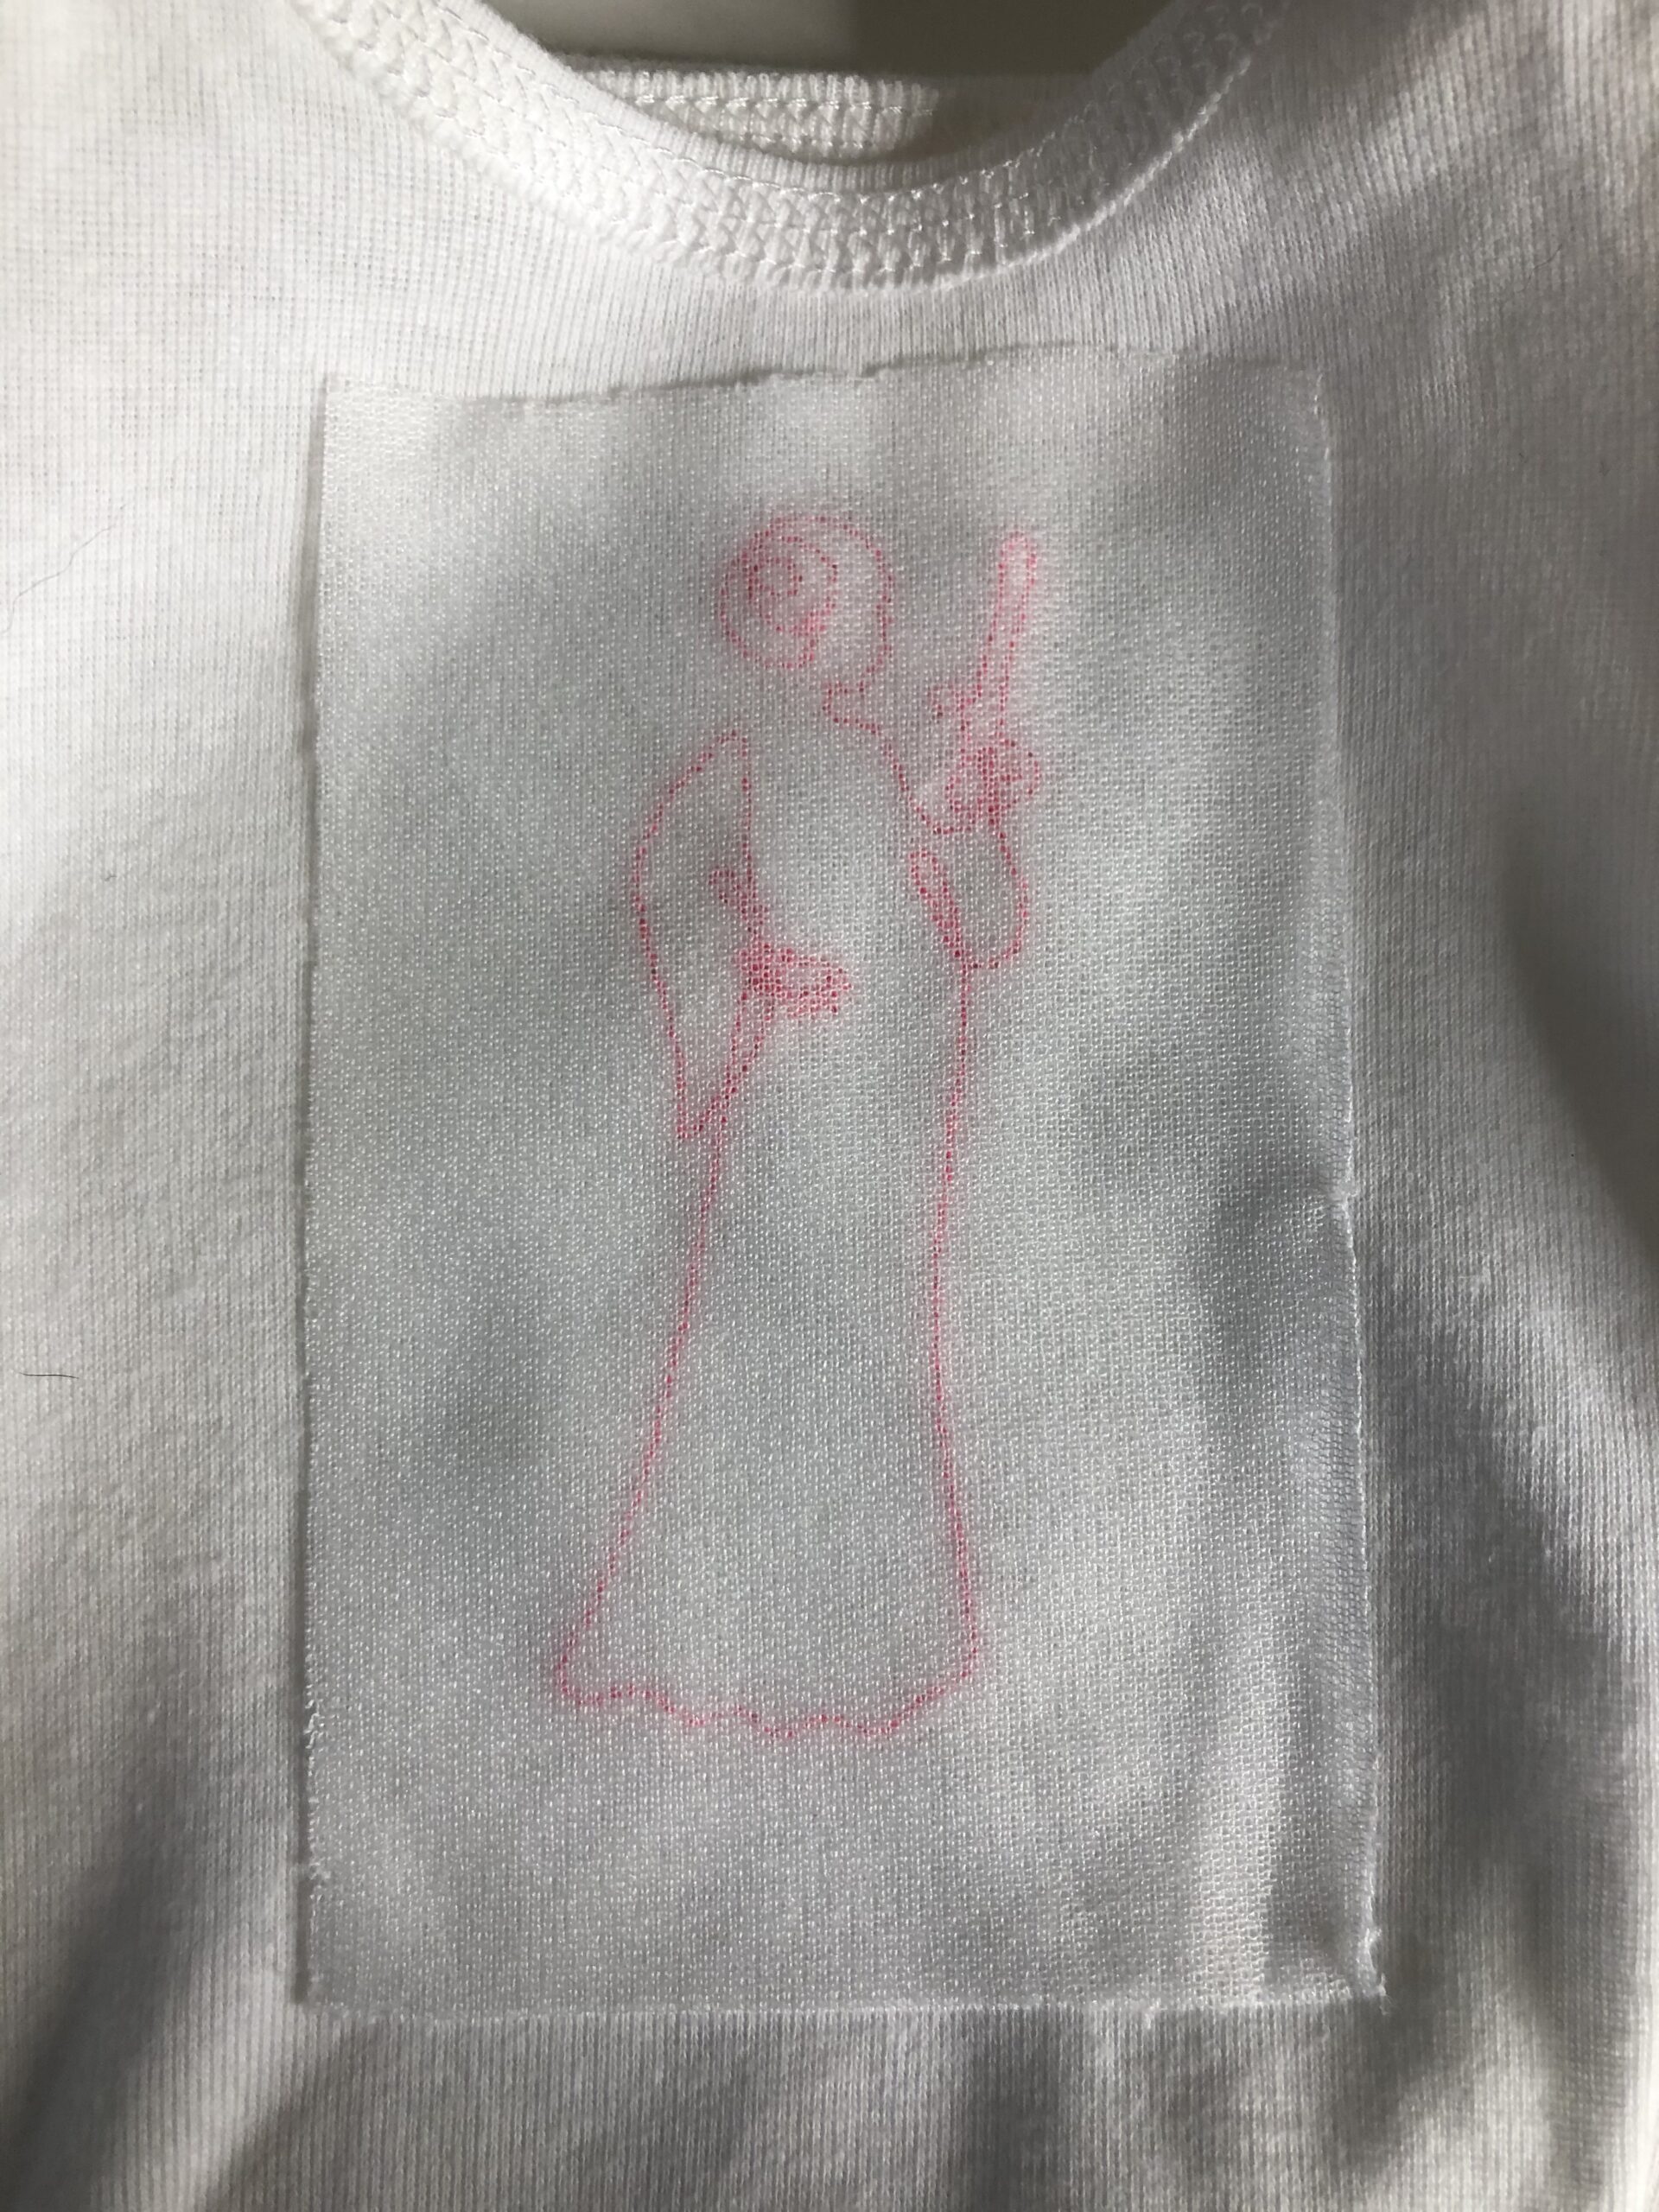 embroidery wrong side